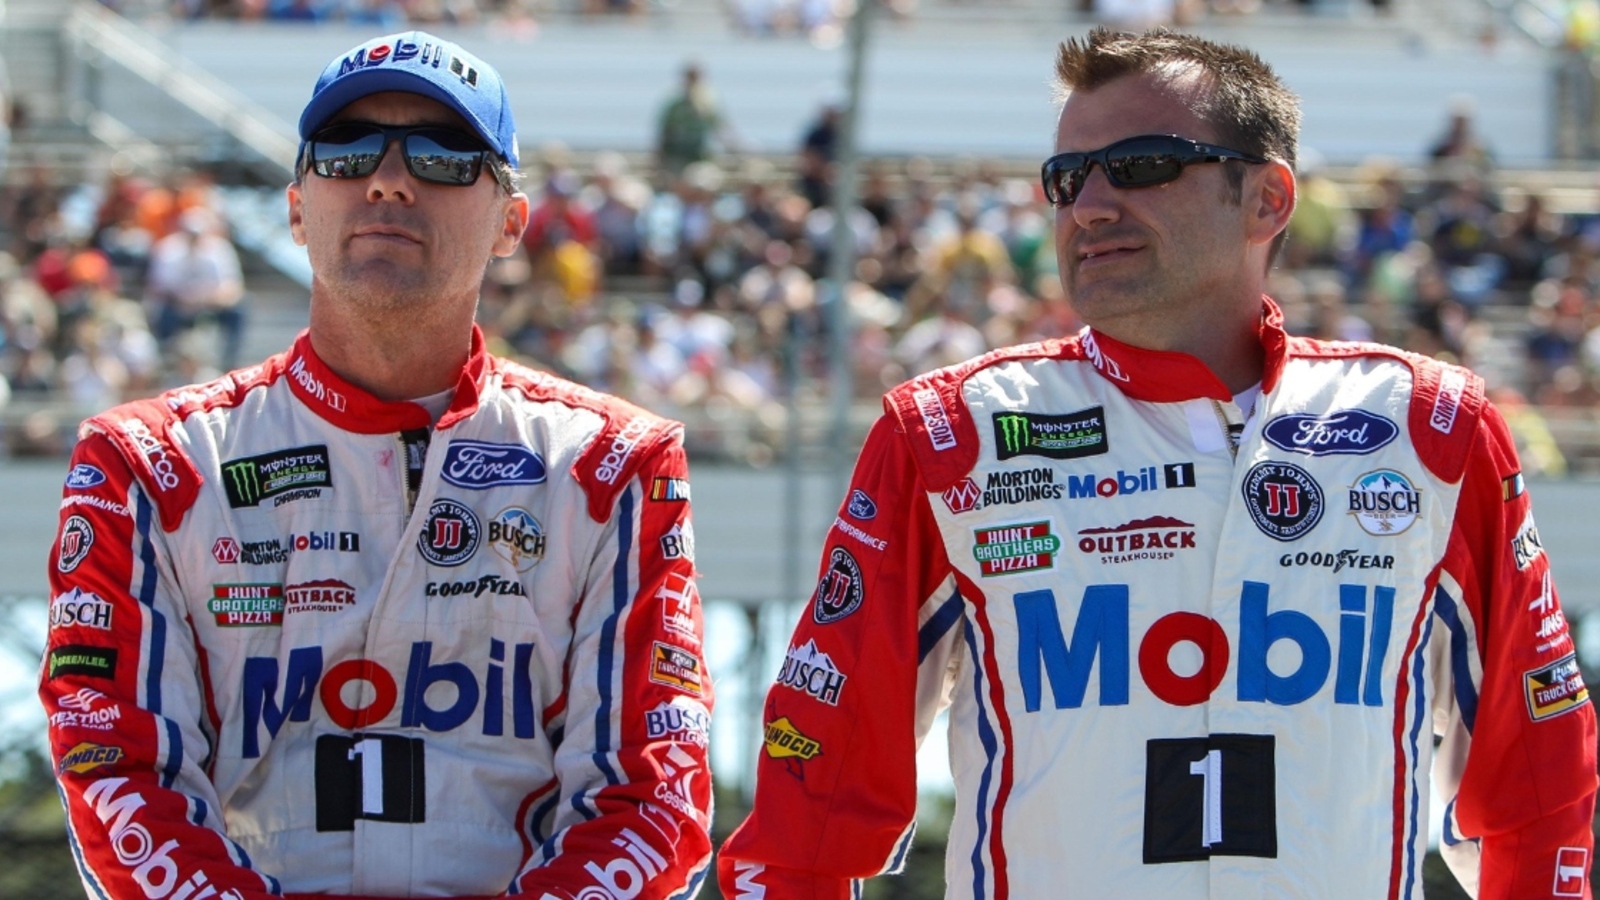 Rodney Childers shuts down rumors No. 4 team is being dismantled after Kevin Harvick’s retirement